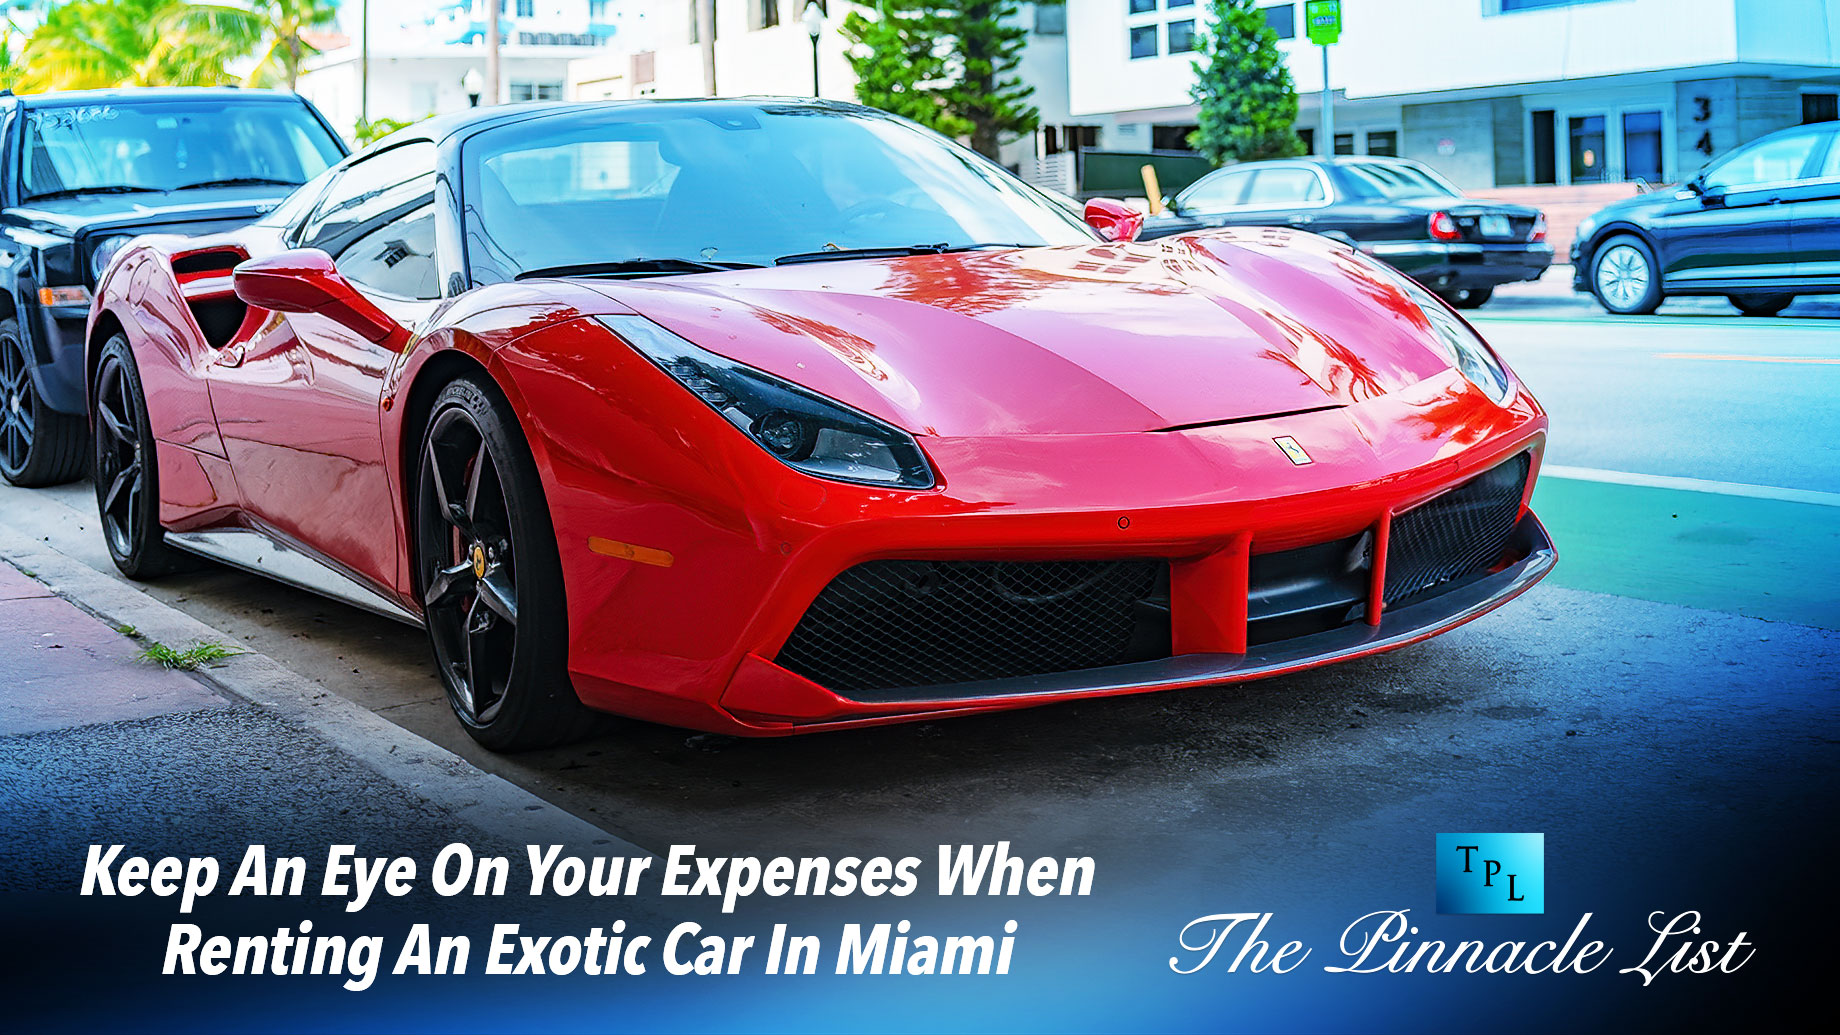 Keep An Eye On Your Expenses When Renting An Exotic Car In Miami